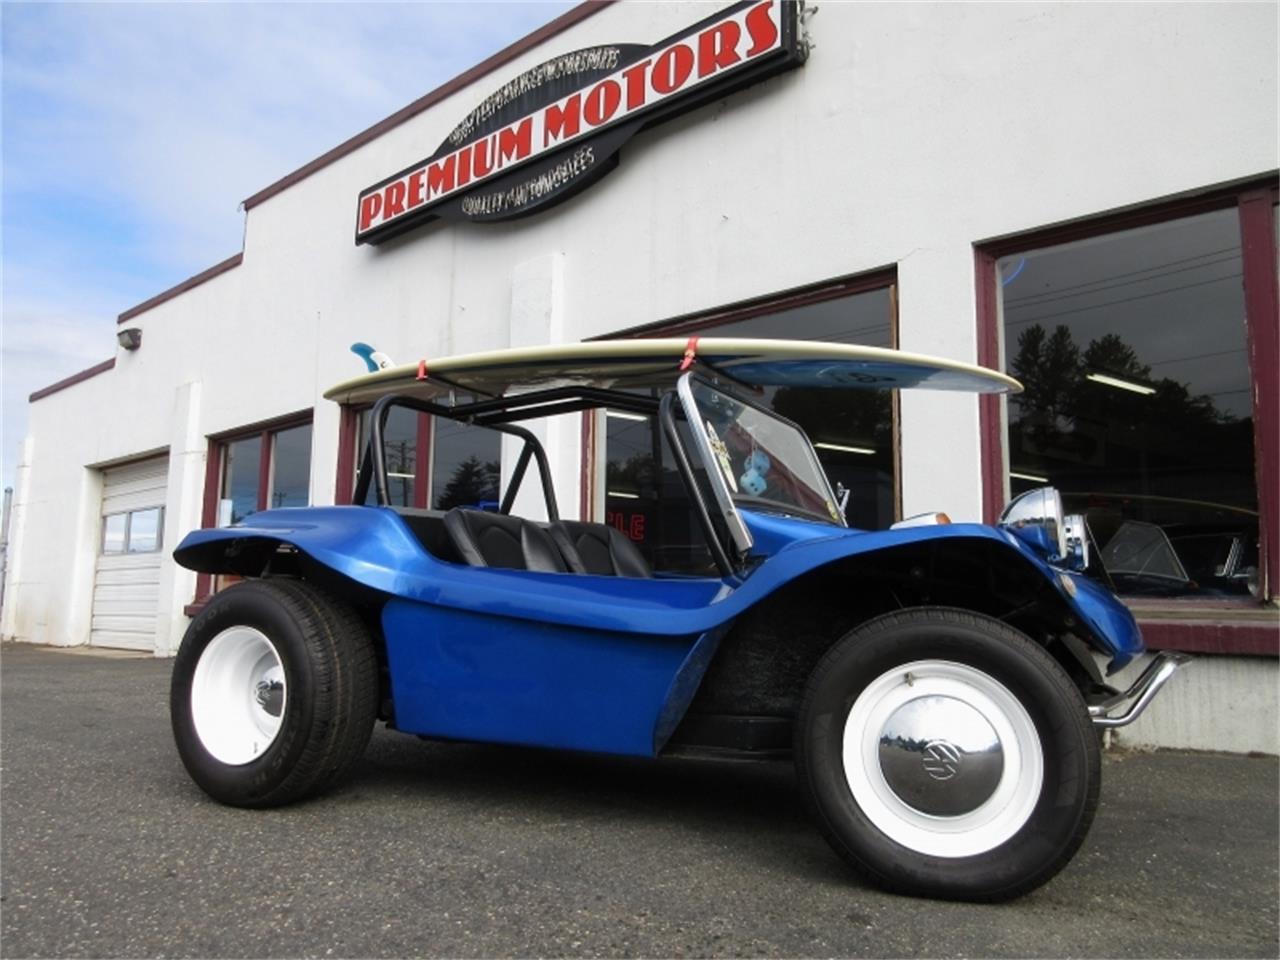 1964 vw dune buggy for sale